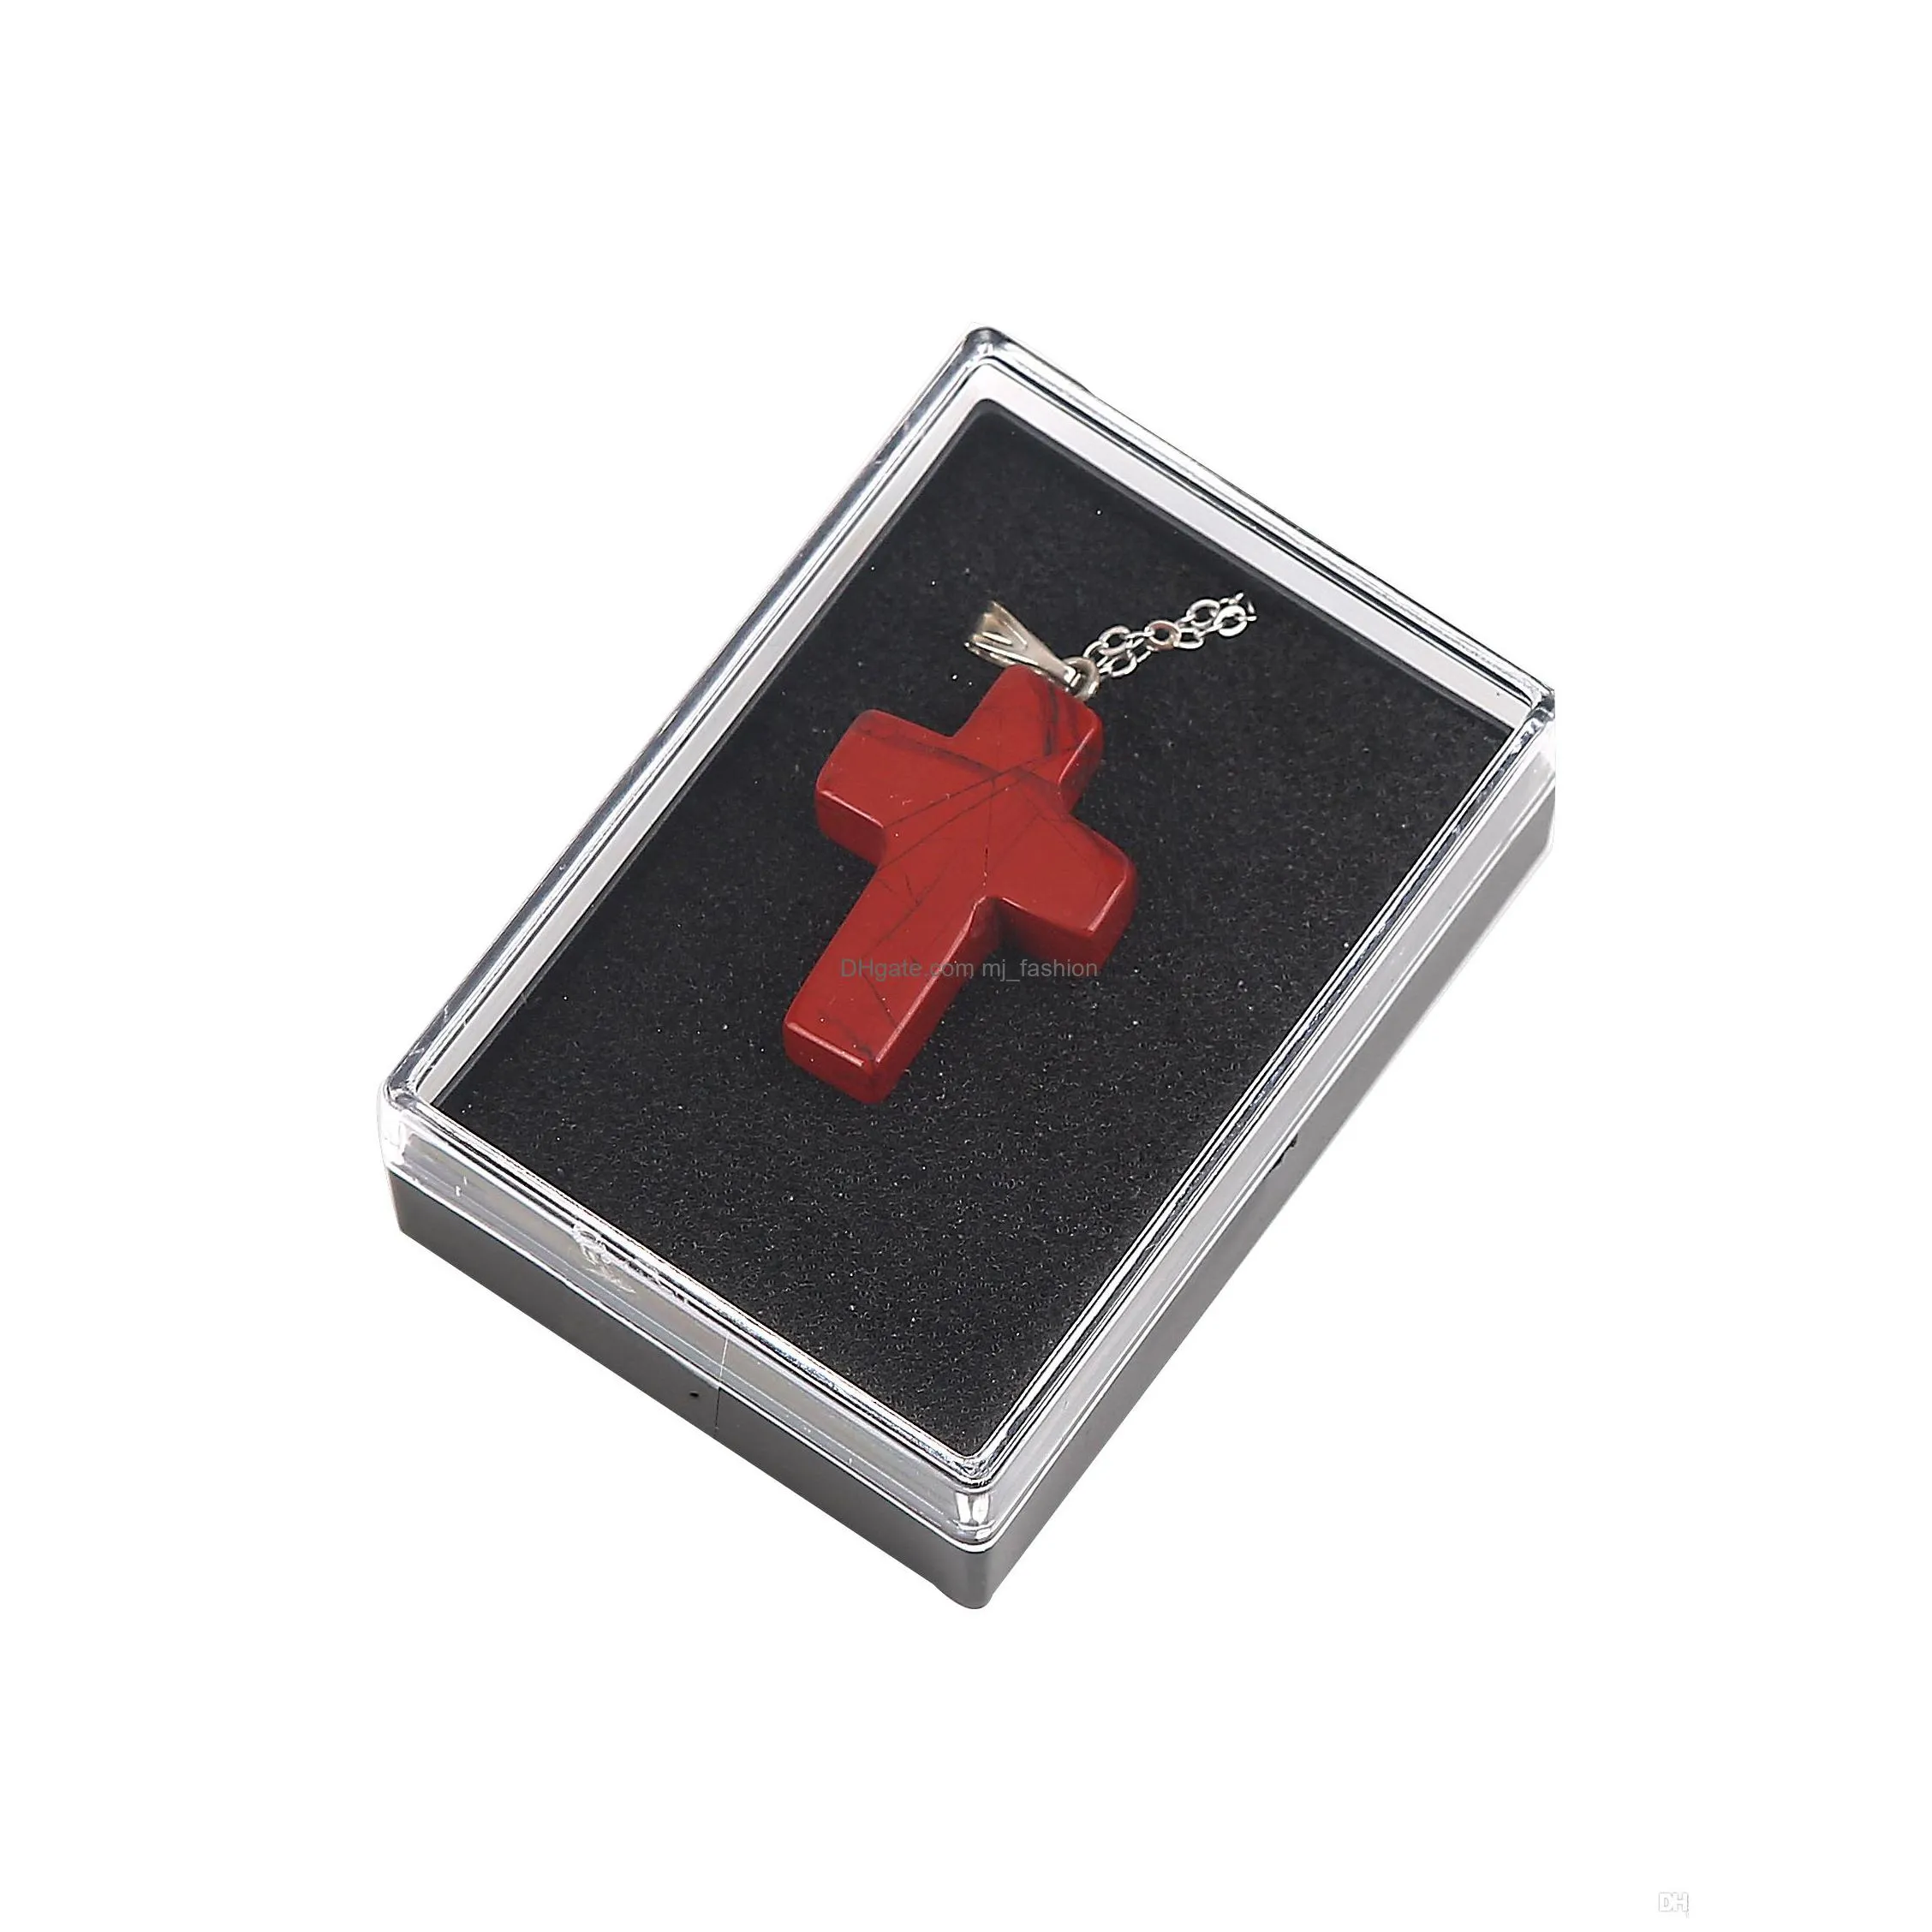 multicolored cross pendant necklace men and women personality innovative fashion jewelry